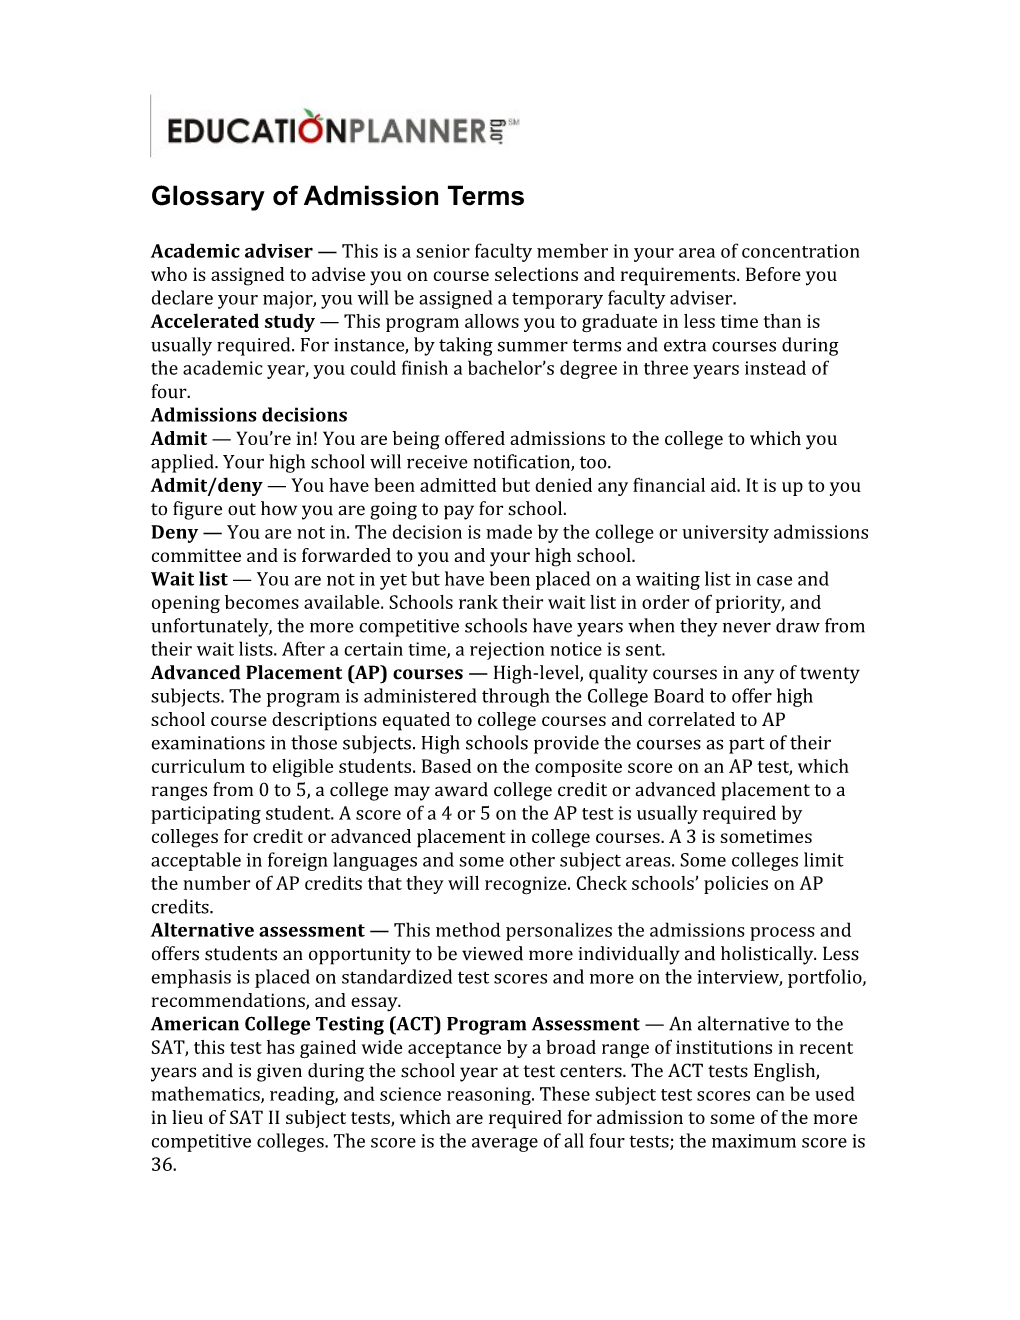 Glossary of Admission Terms